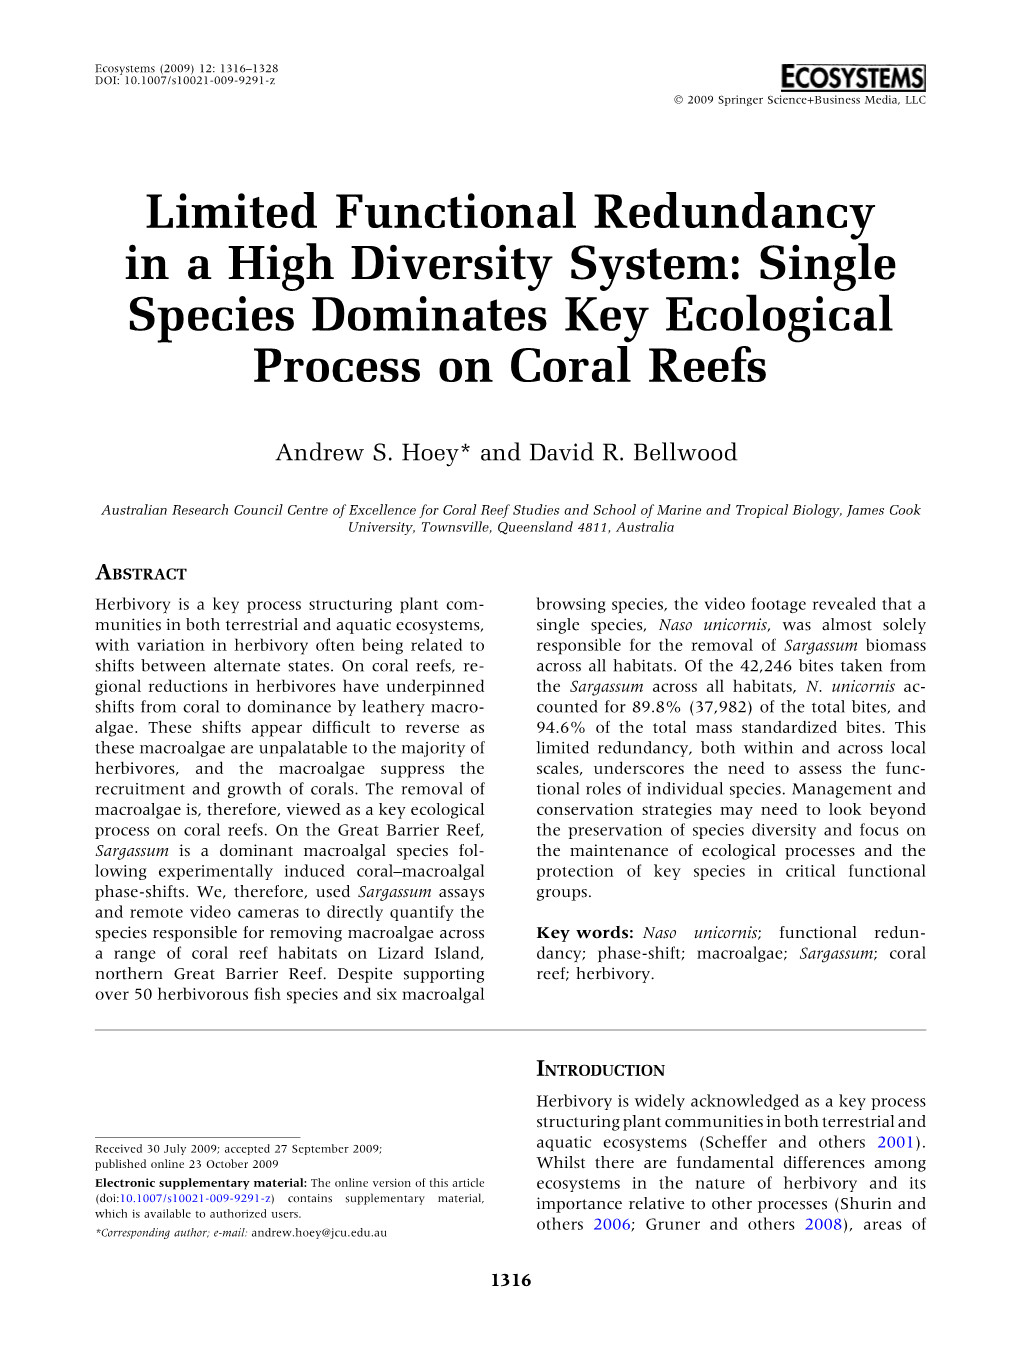 Limited Functional Redundancy in a High Diversity System: Single Species Dominates Key Ecological Process on Coral Reefs